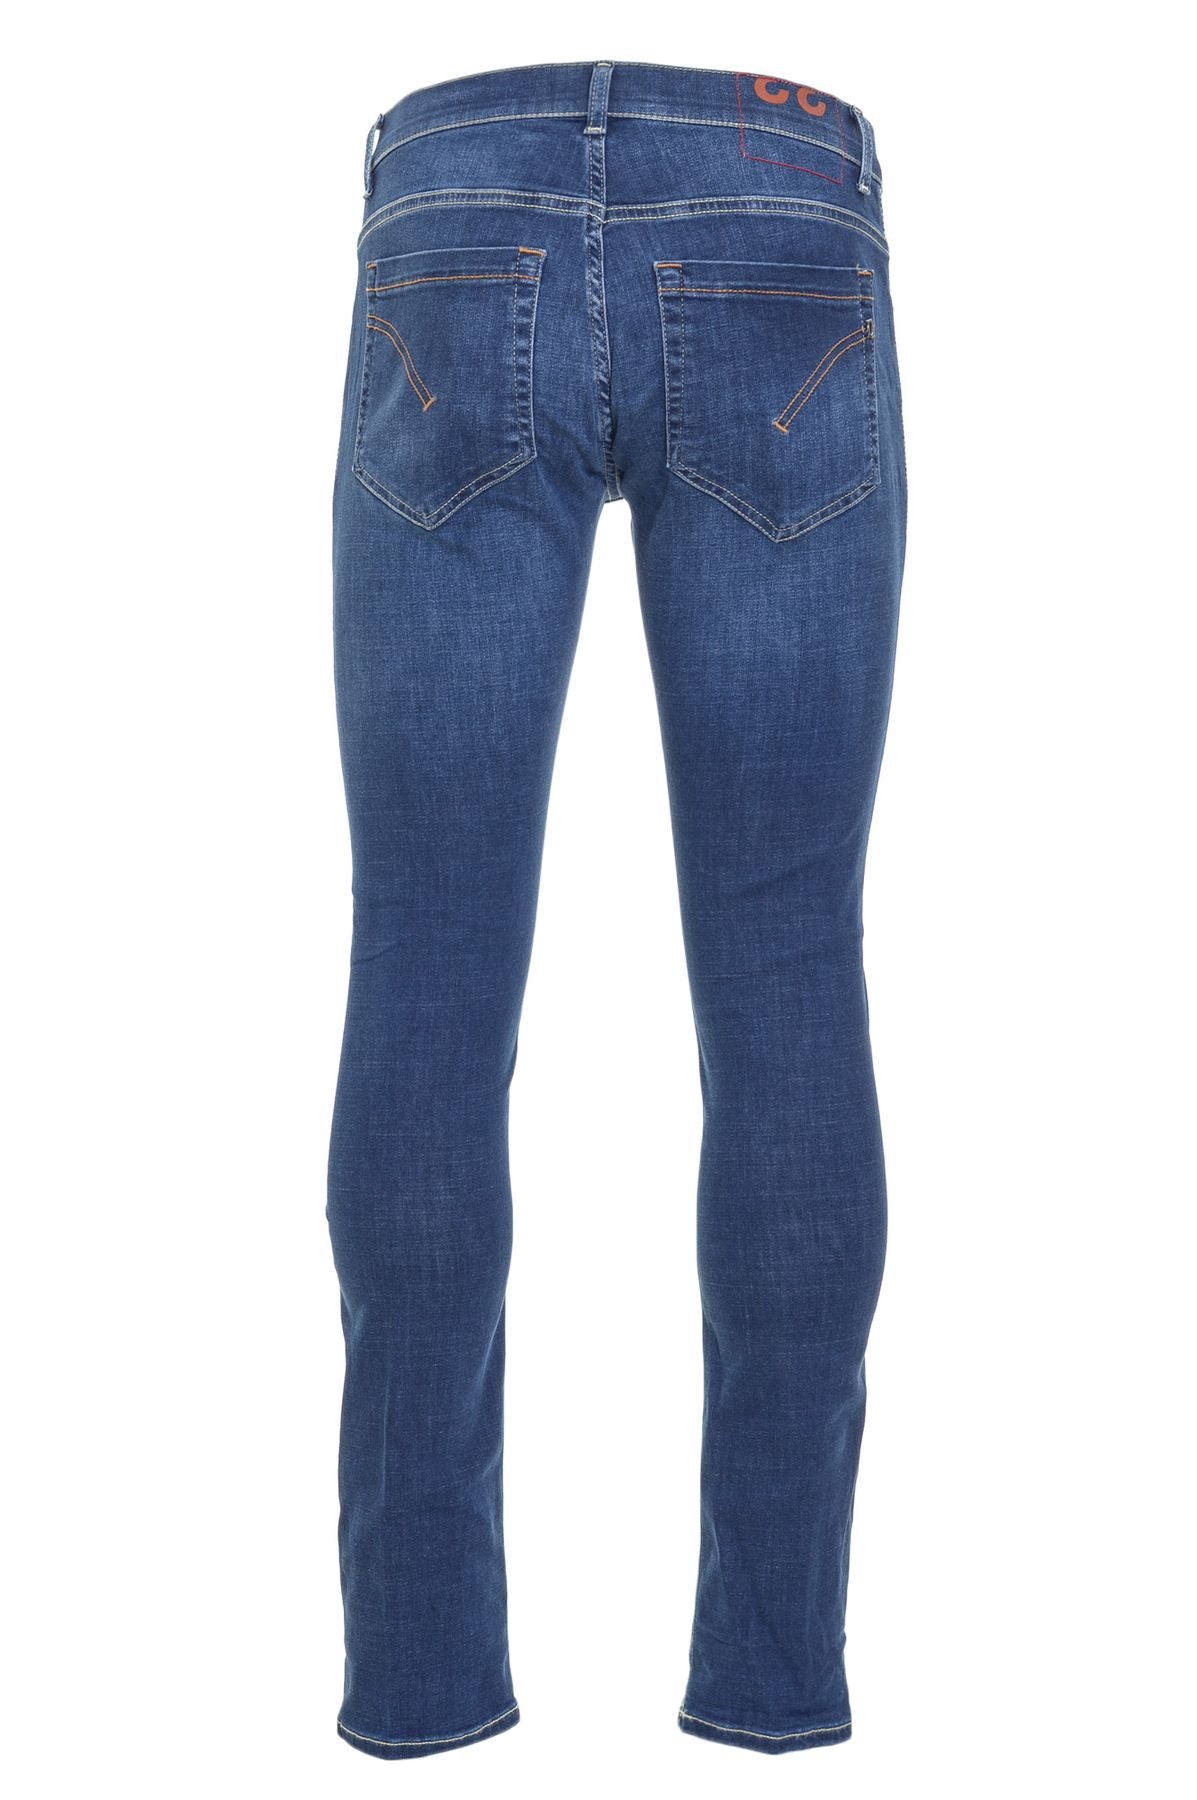 DONDUP Jeans Autunno/Inverno up232dse301uci6